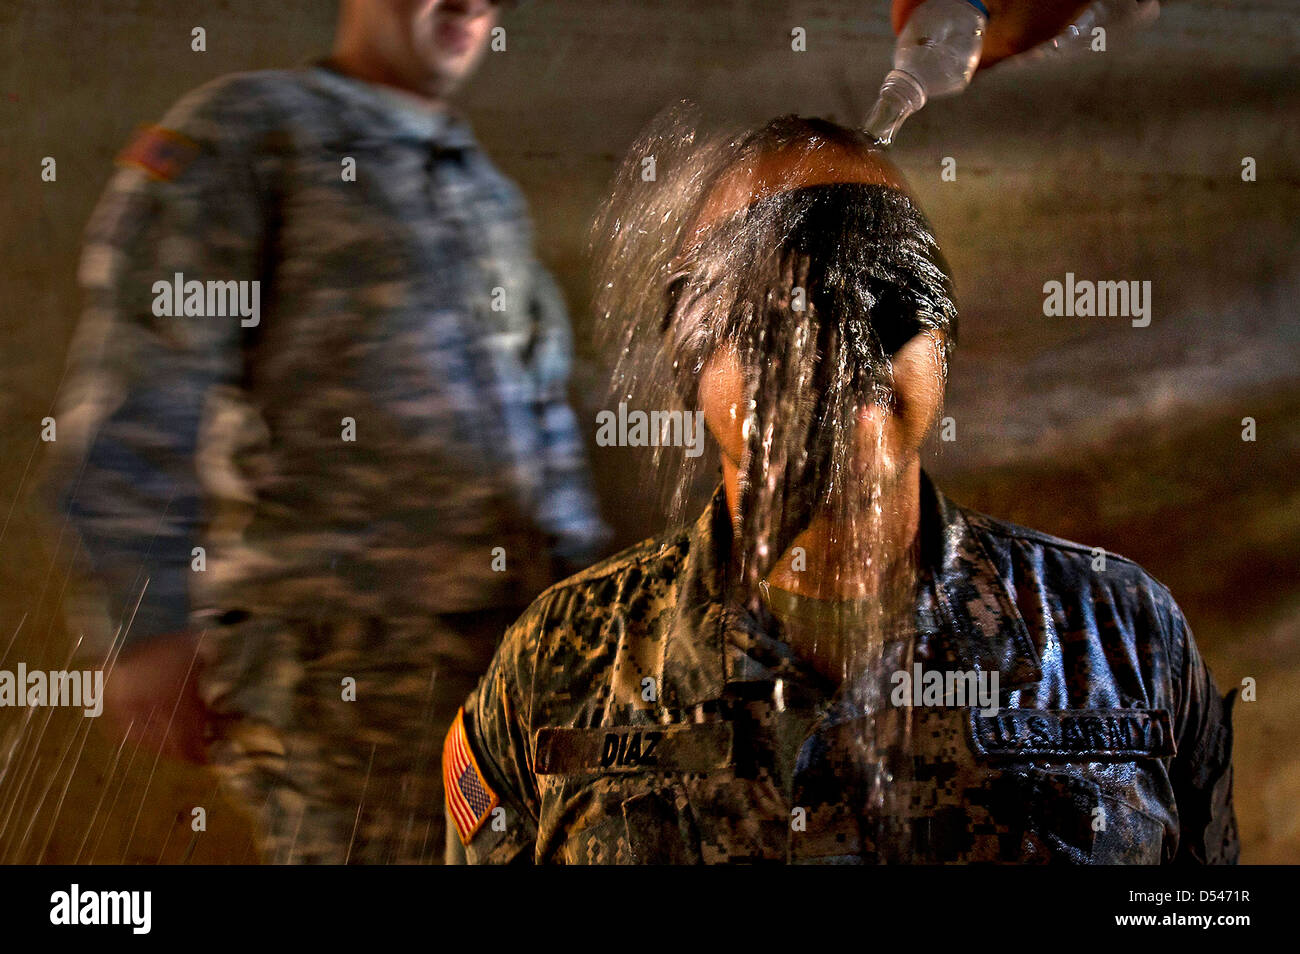 US Army Sgt. Fernando Diaz blind folded has ice-cold water dumped over his head during a mock interrogation simulating water boarding August 30, 2012 at Schofield Barracks in Wahiawa, Hawaii. Stock Photo